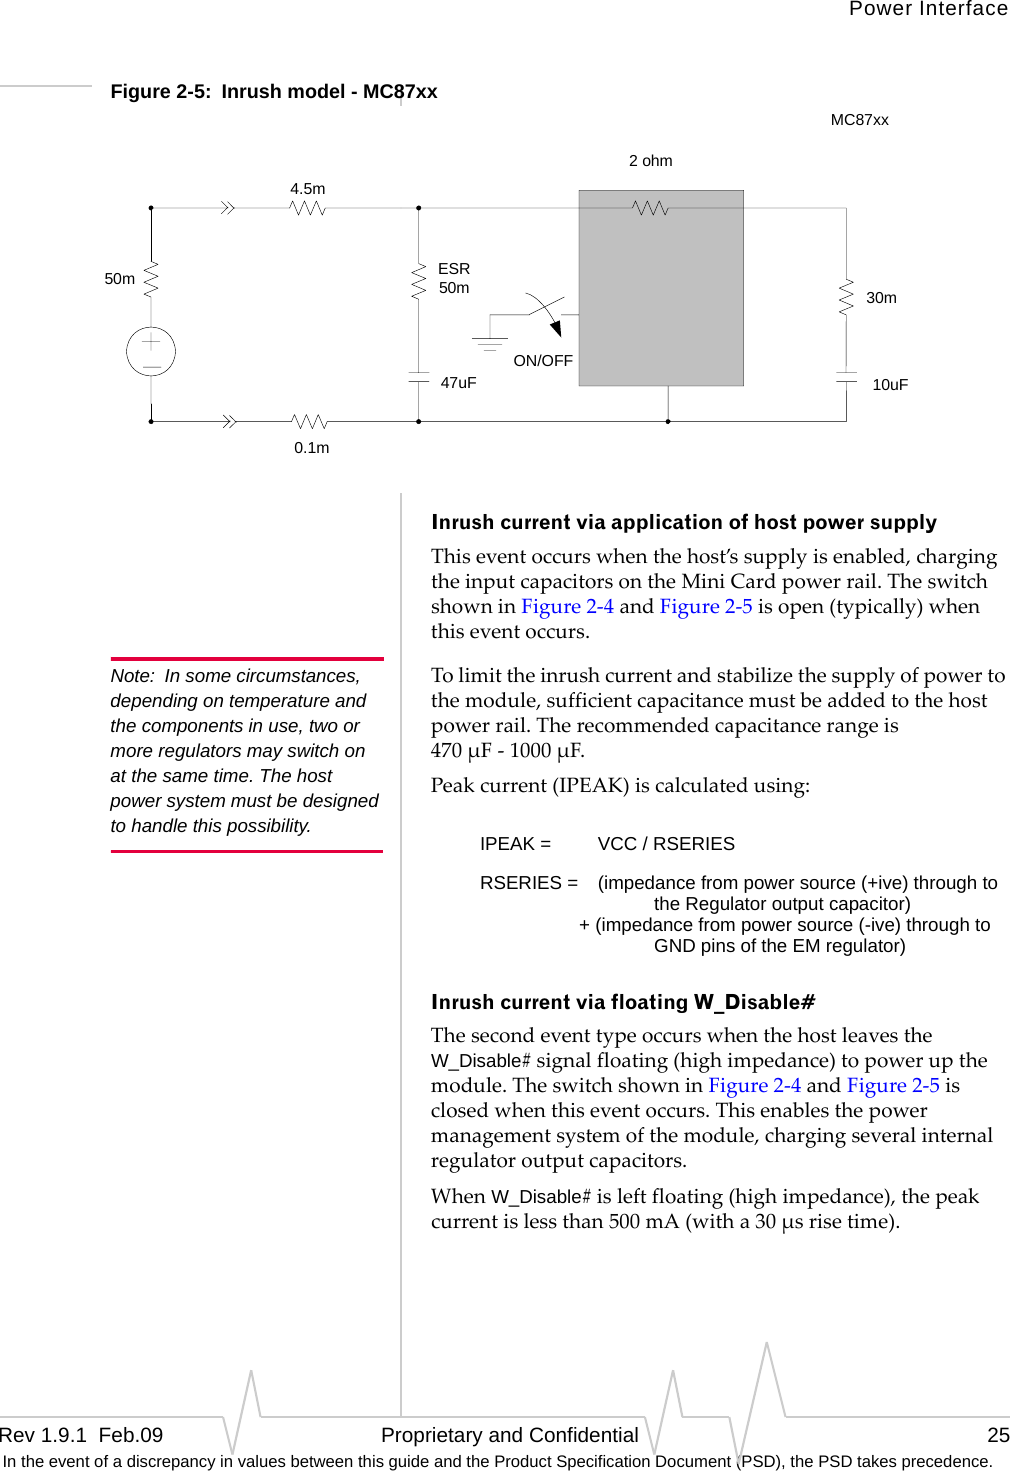 Power InterfaceRev 1.9.1  Feb.09   Proprietary and Confidential 25 In the event of a discrepancy in values between this guide and the Product Specification Document (PSD), the PSD takes precedence.Figure 2-5:  Inrush model - MC87xx Inrush current via application of host power supplyThiseventoccurswhenthehost’ssupplyisenabled,chargingtheinputcapacitorsontheMiniCardpowerrail.TheswitchshowninFigure2‐4andFigure2‐5isopen(typically)whenthiseventoccurs.Note: In some circumstances, depending on temperature and the components in use, two or more regulators may switch on at the same time. The host power system must be designed to handle this possibility.Tolimittheinrushcurrentandstabilizethesupplyofpowertothemodule,sufficientcapacitancemustbeaddedtothehostpowerrail.Therecommendedcapacitancerangeis470μF‐1000μF.Peakcurrent(IPEAK)iscalculatedusing:Inrush current via floating W_Disable#ThesecondeventtypeoccurswhenthehostleavestheW_Disable#signalfloating(highimpedance)topowerupthemodule.TheswitchshowninFigure2‐4andFigure2‐5isclosedwhenthiseventoccurs.Thisenablesthepowermanagementsystemofthemodule,chargingseveralinternalregulatoroutputcapacitors.WhenW_Disable#isleftfloating(highimpedance),thepeakcurrentislessthan500mA(witha30μsrisetime).ON/OFF50m2 ohm30m0.1m10uFESR50m4.5m47uFMC87xxIPEAK =  VCC / RSERIESRSERIES = (impedance from power source (+ive) through to the Regulator output capacitor) + (impedance from power source (-ive) through to GND pins of the EM regulator)